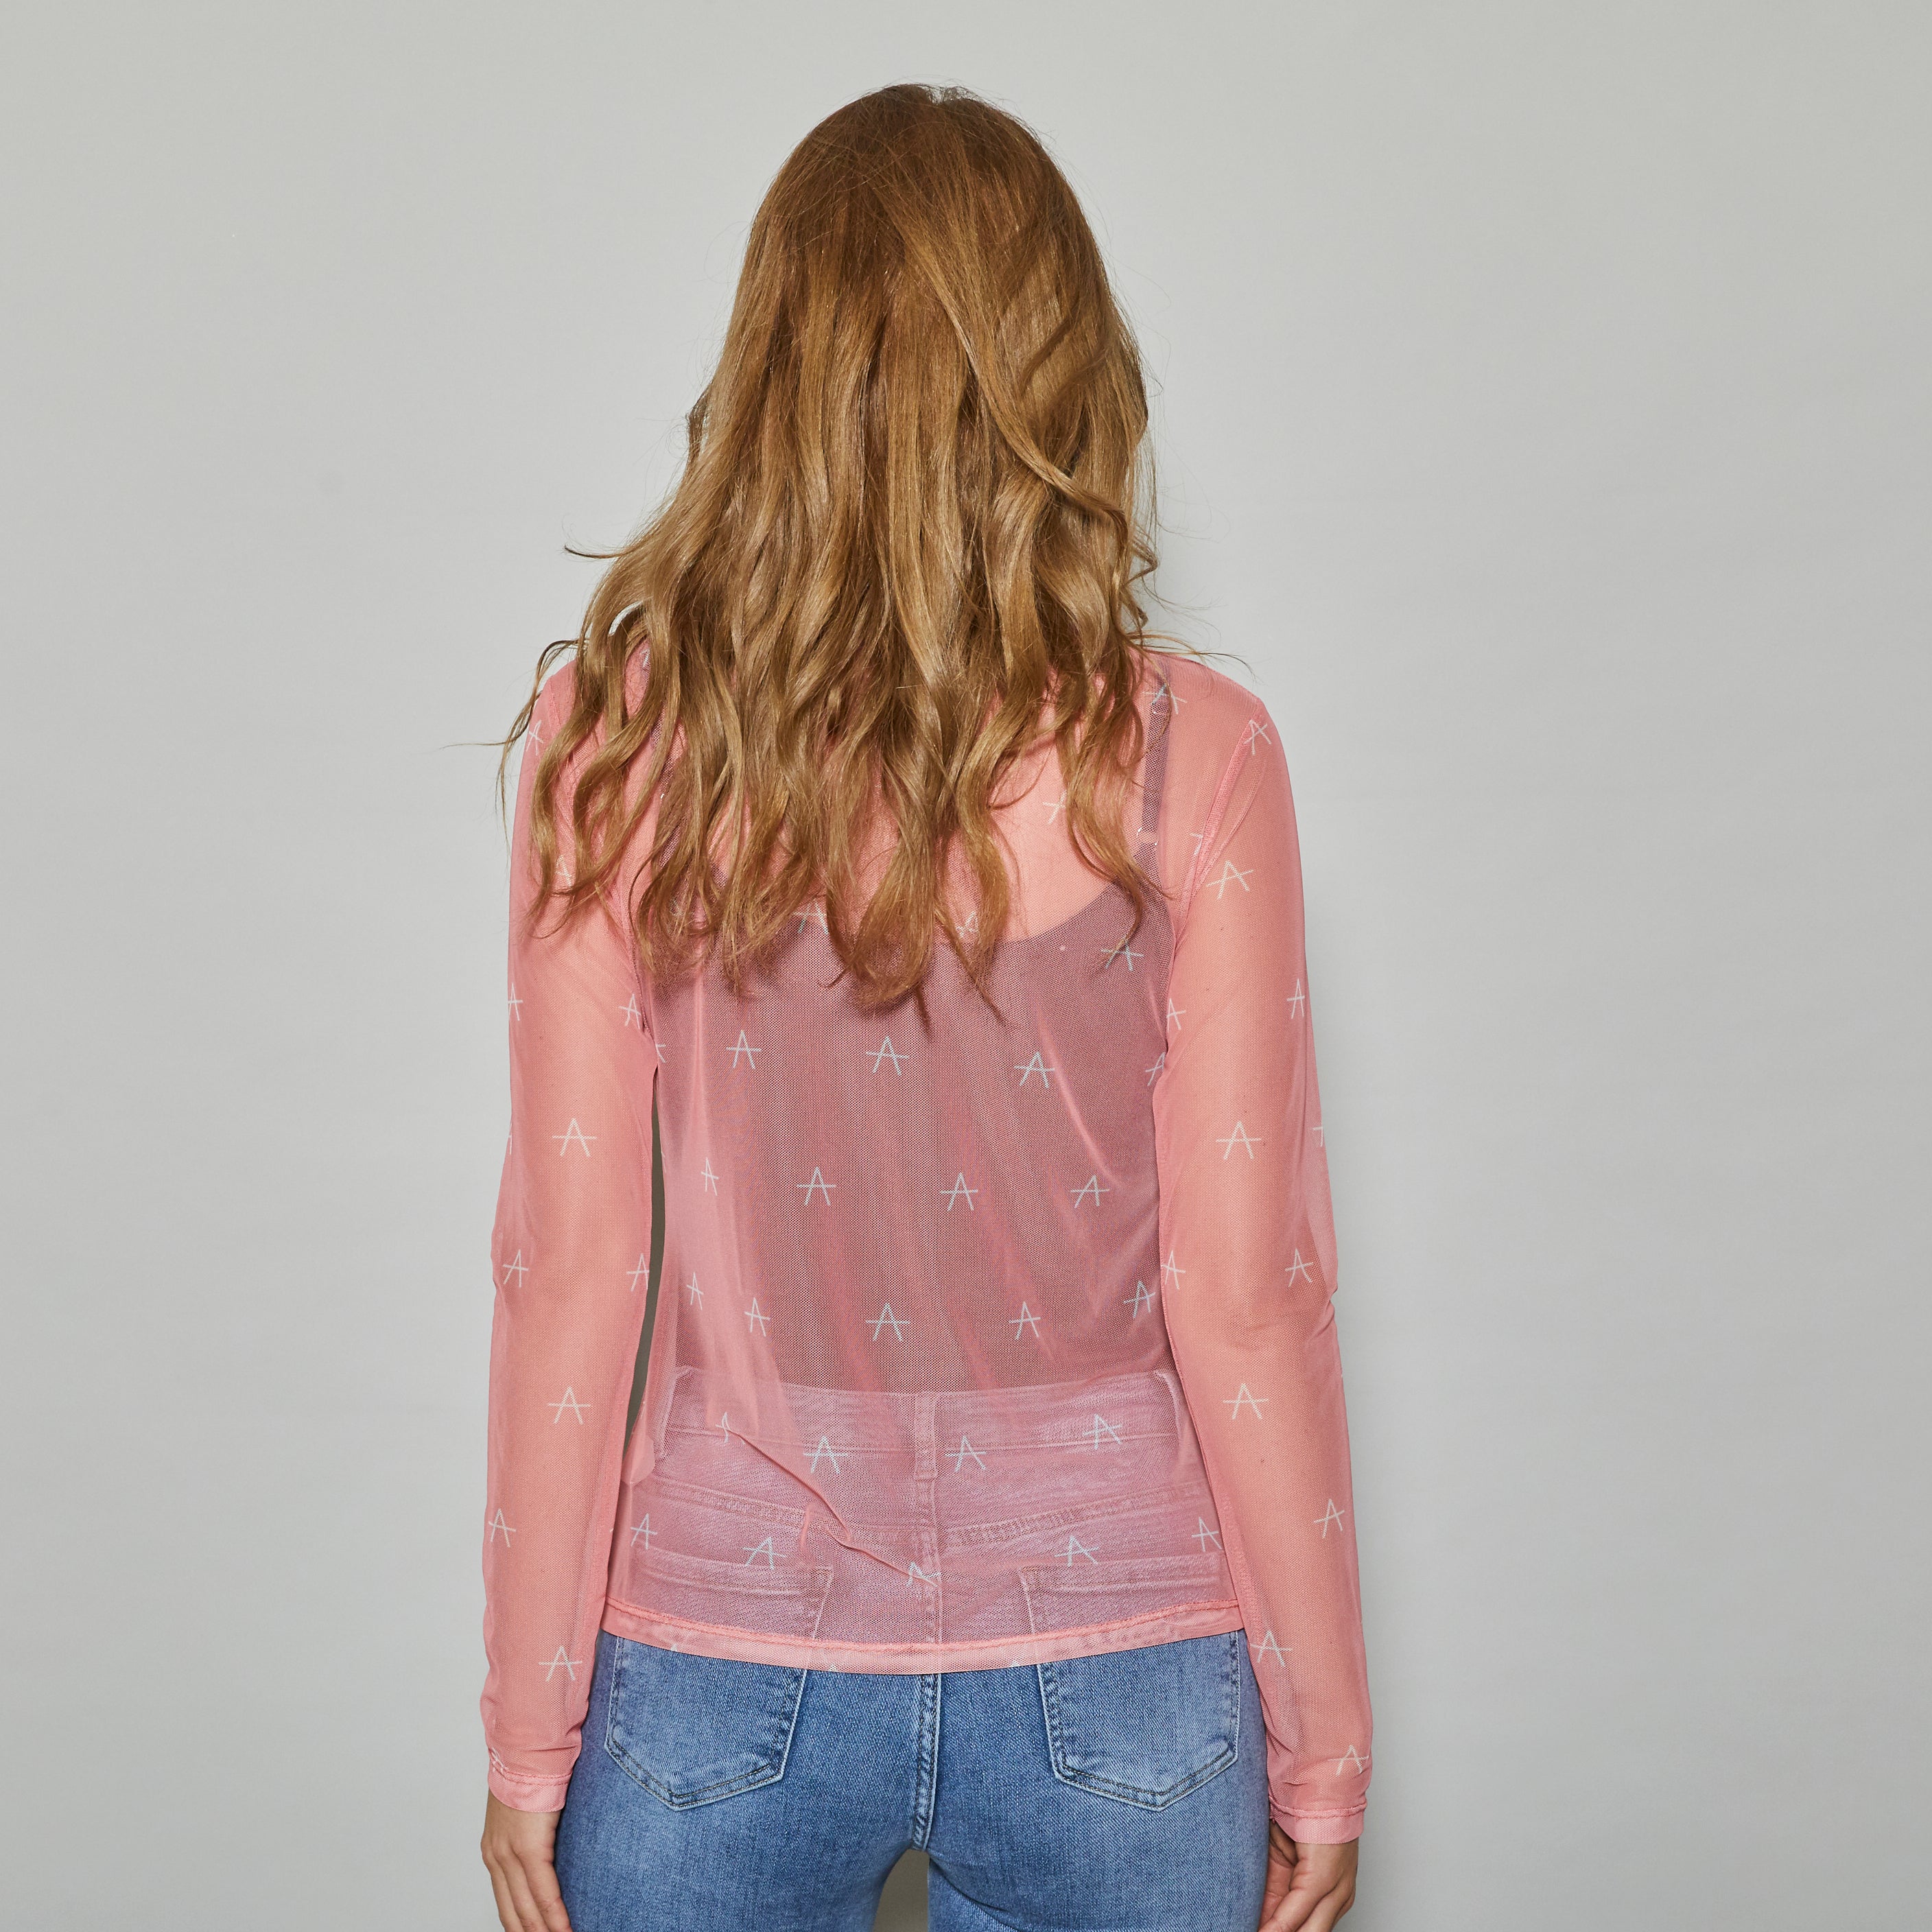 ALLWEEK Fro mesh blouse Blouse Rosa with white A